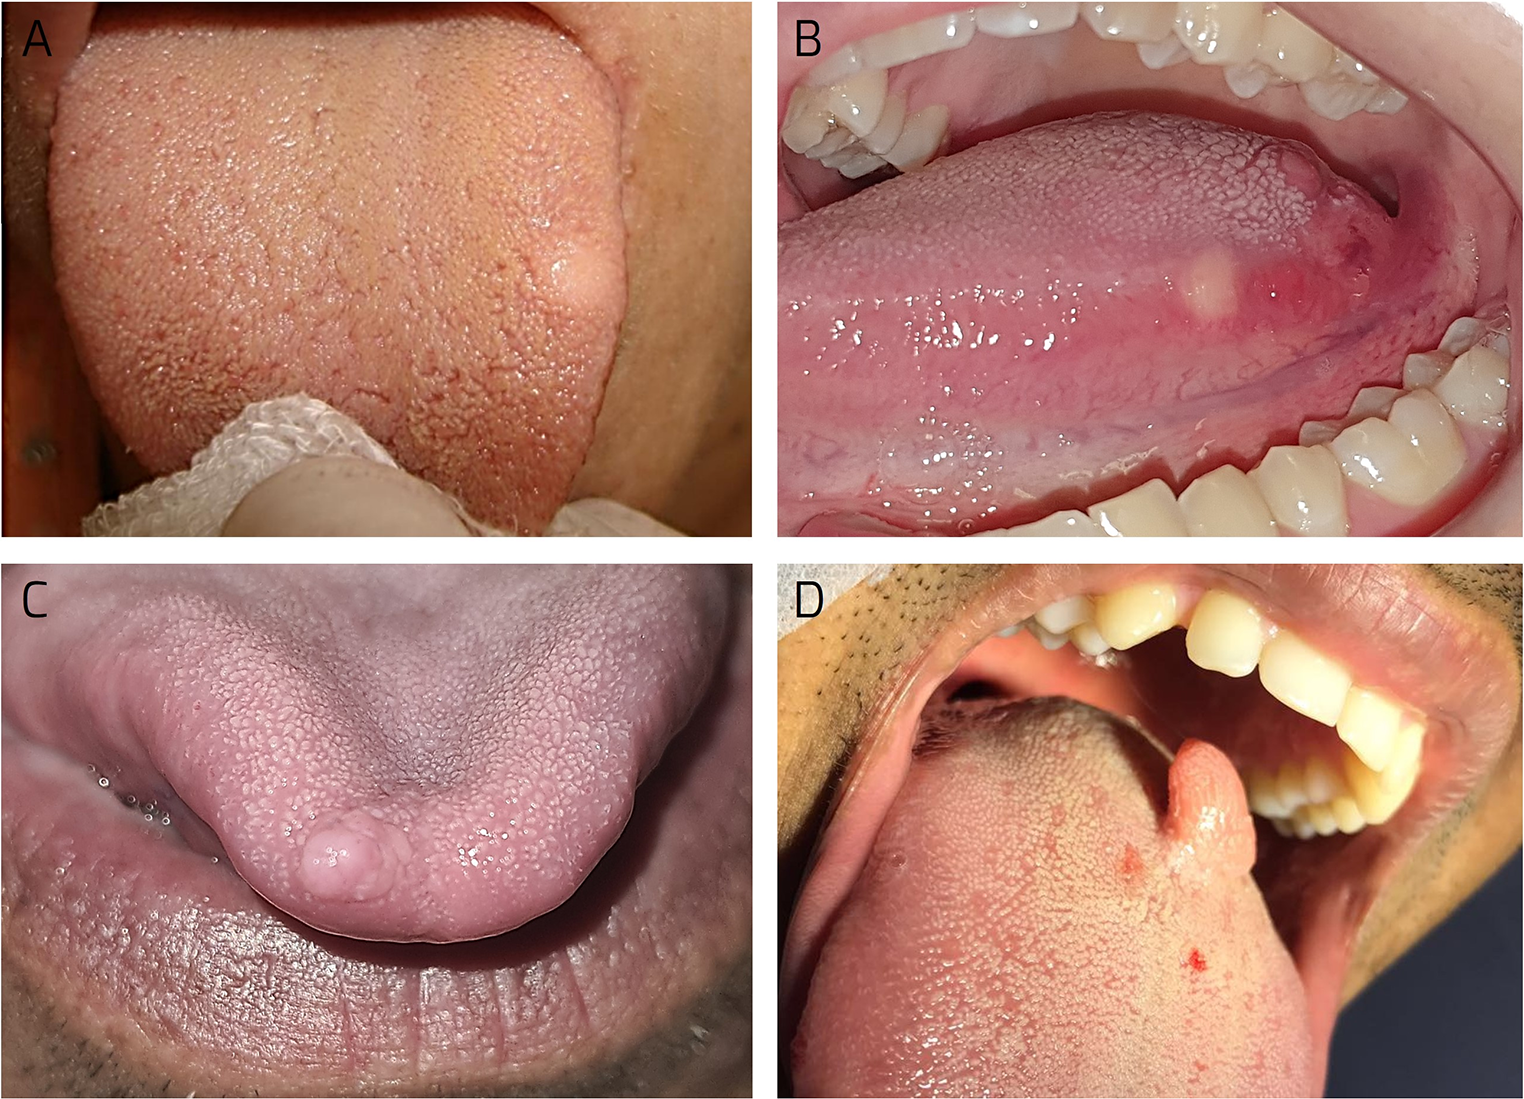 Oral granular cell tumor: a collaborative clinicopathological study of 61 cases